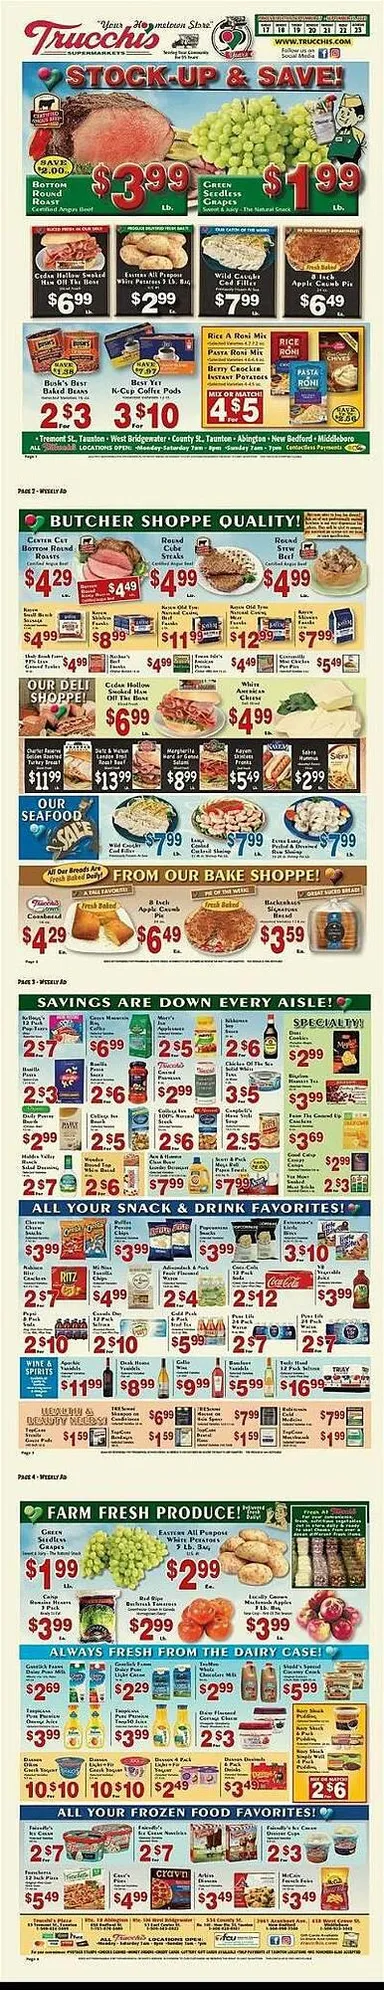 Trucchis Weekly Ad